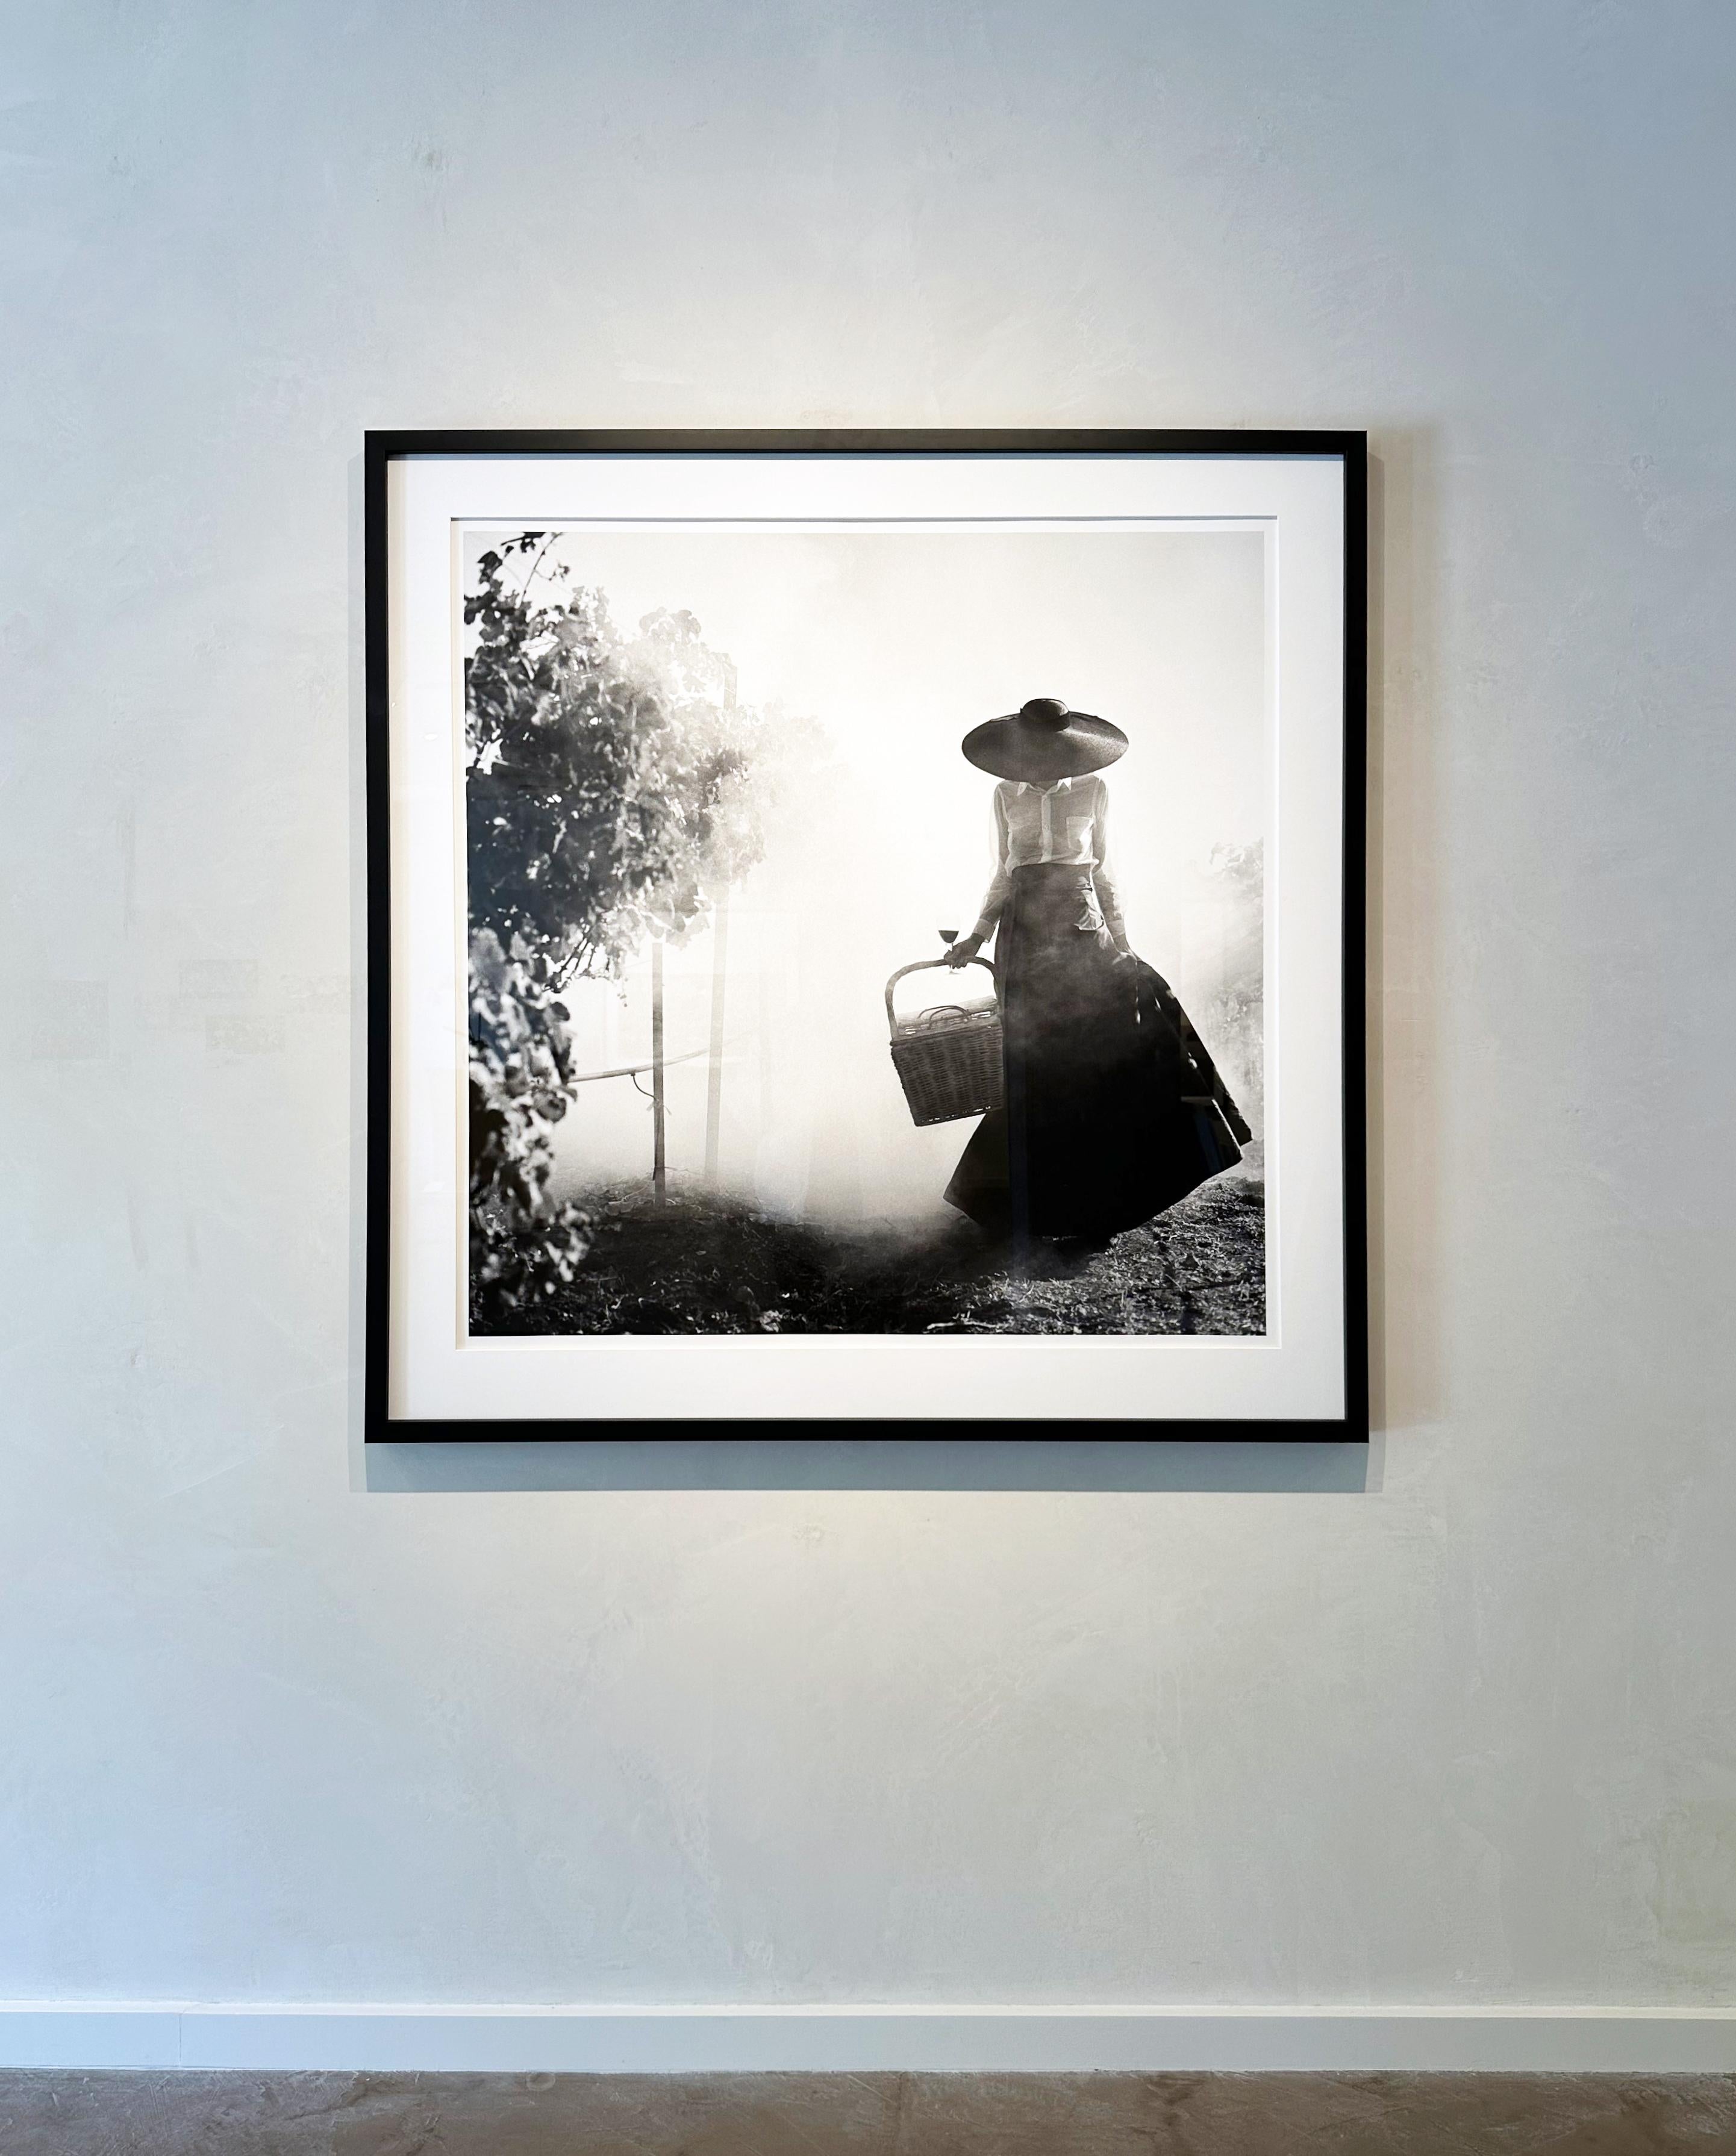 Woman Holding Up Dress Walking Through Vineyard, Napa Valley - FRAMED - Photograph by Rodney Smith